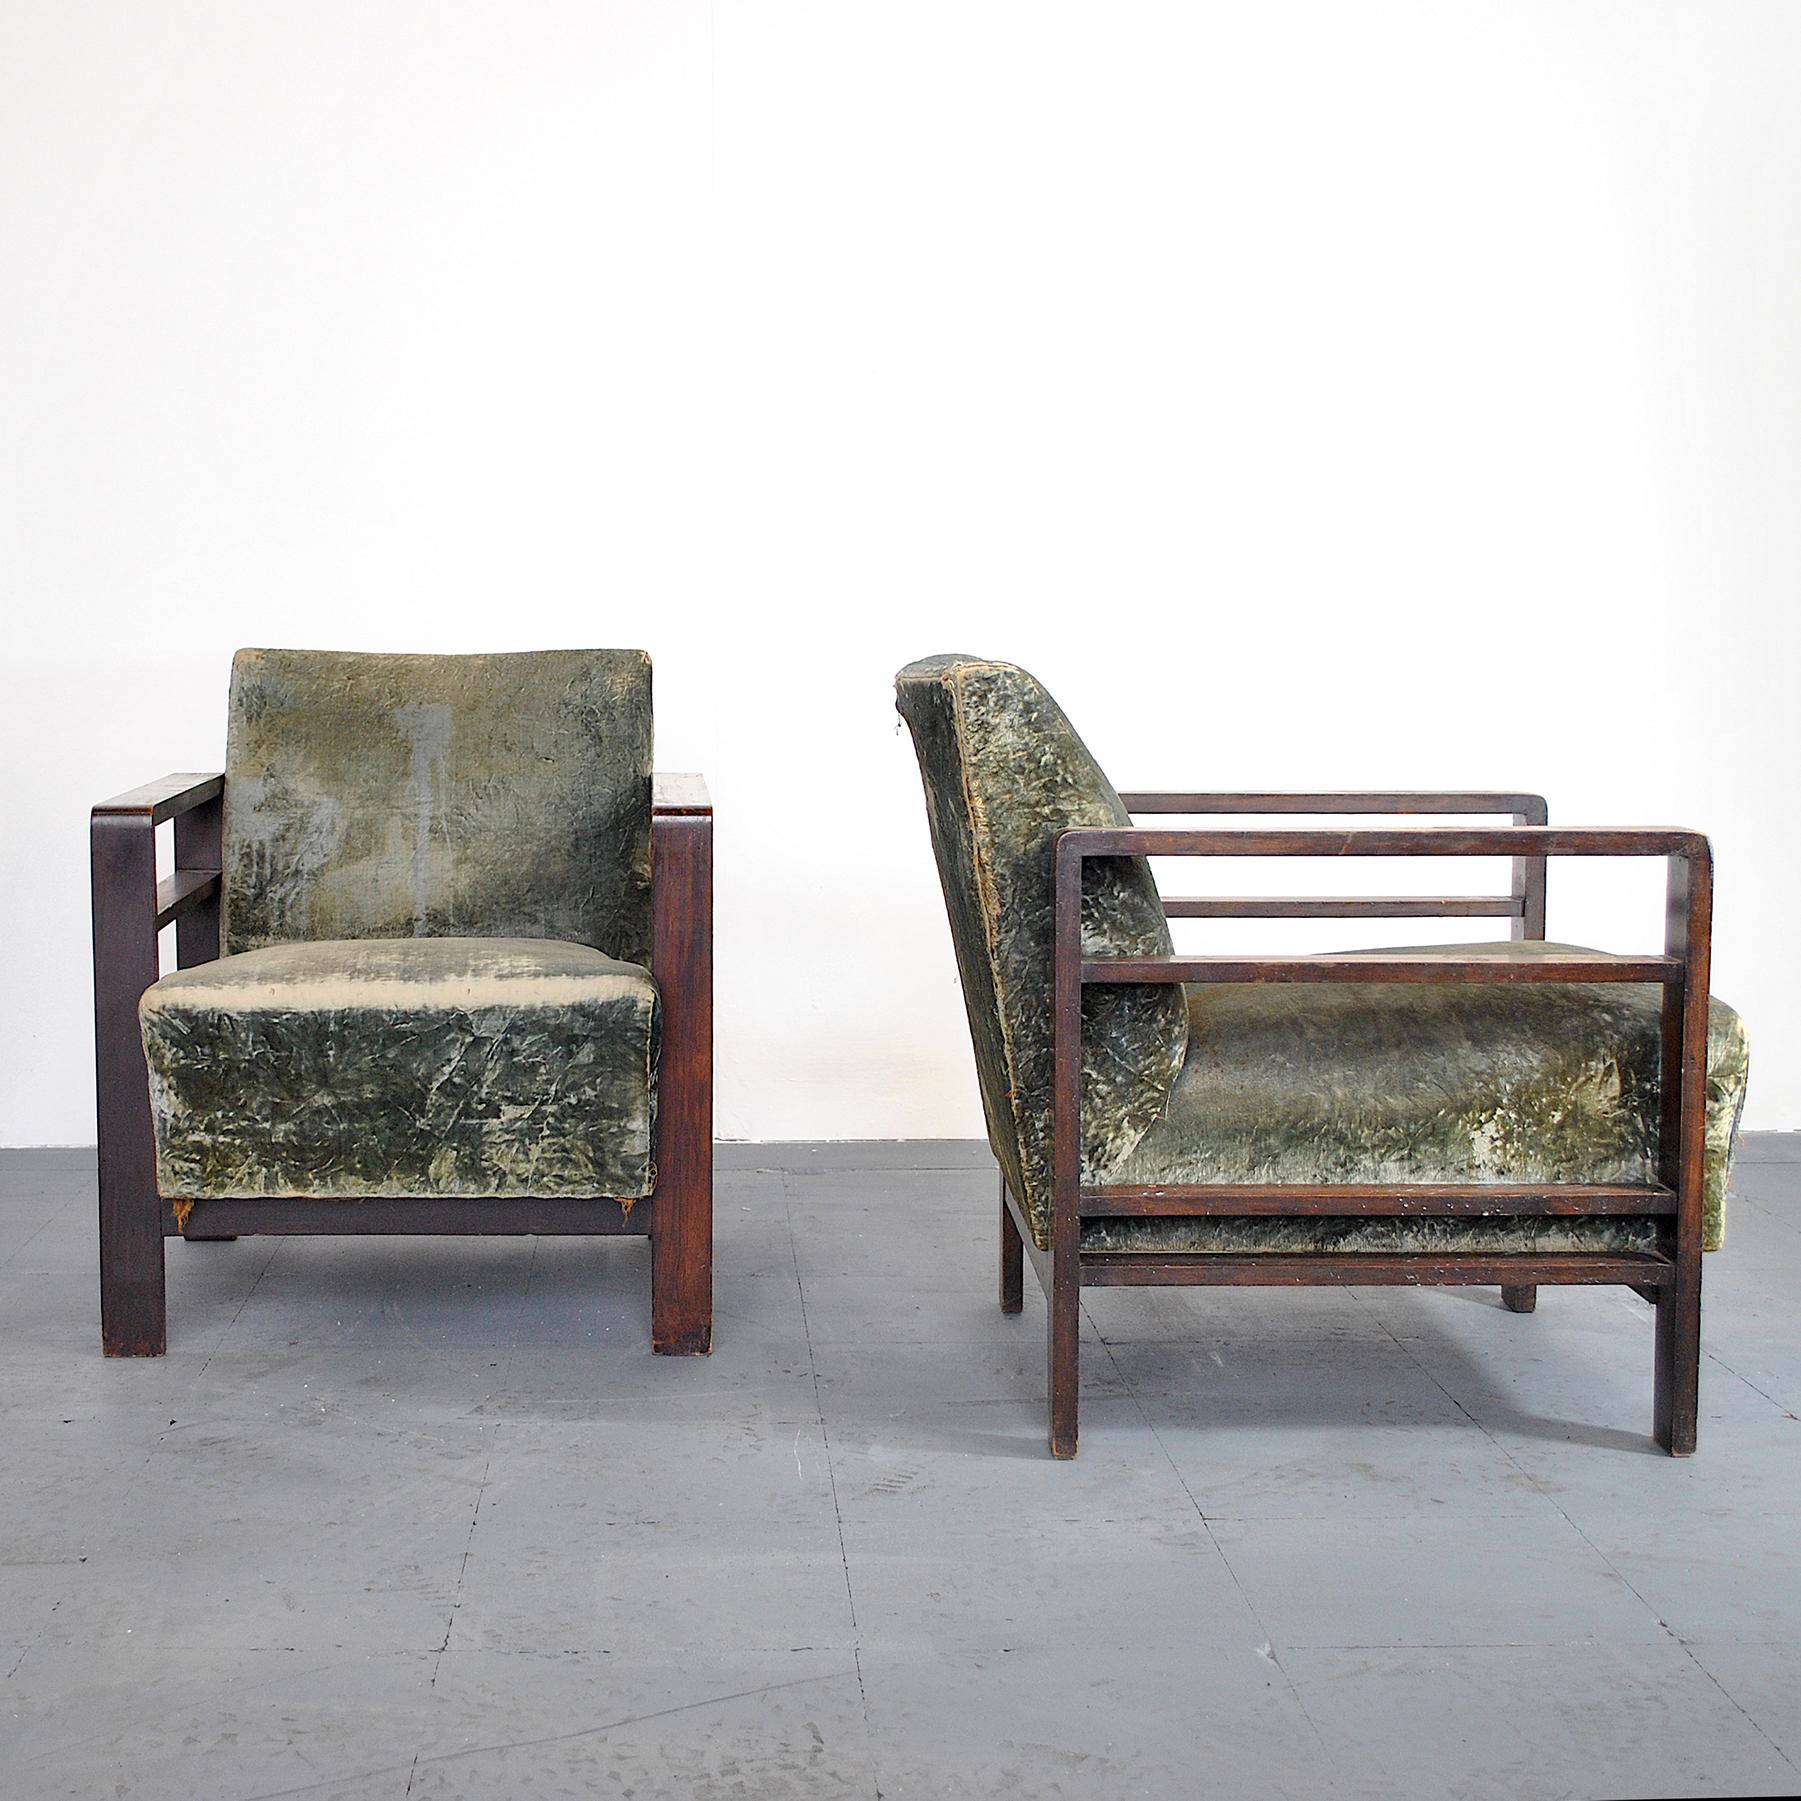 Pair of early 1940s armchairs in pure Italian rationalism style Giuseppe Pagano.

Giuseppe Pogatschnig Pagano (1896-1945), architect and designer of Istrian origin, was an exponent of Italian Rationalism.

Among his most important projects as an